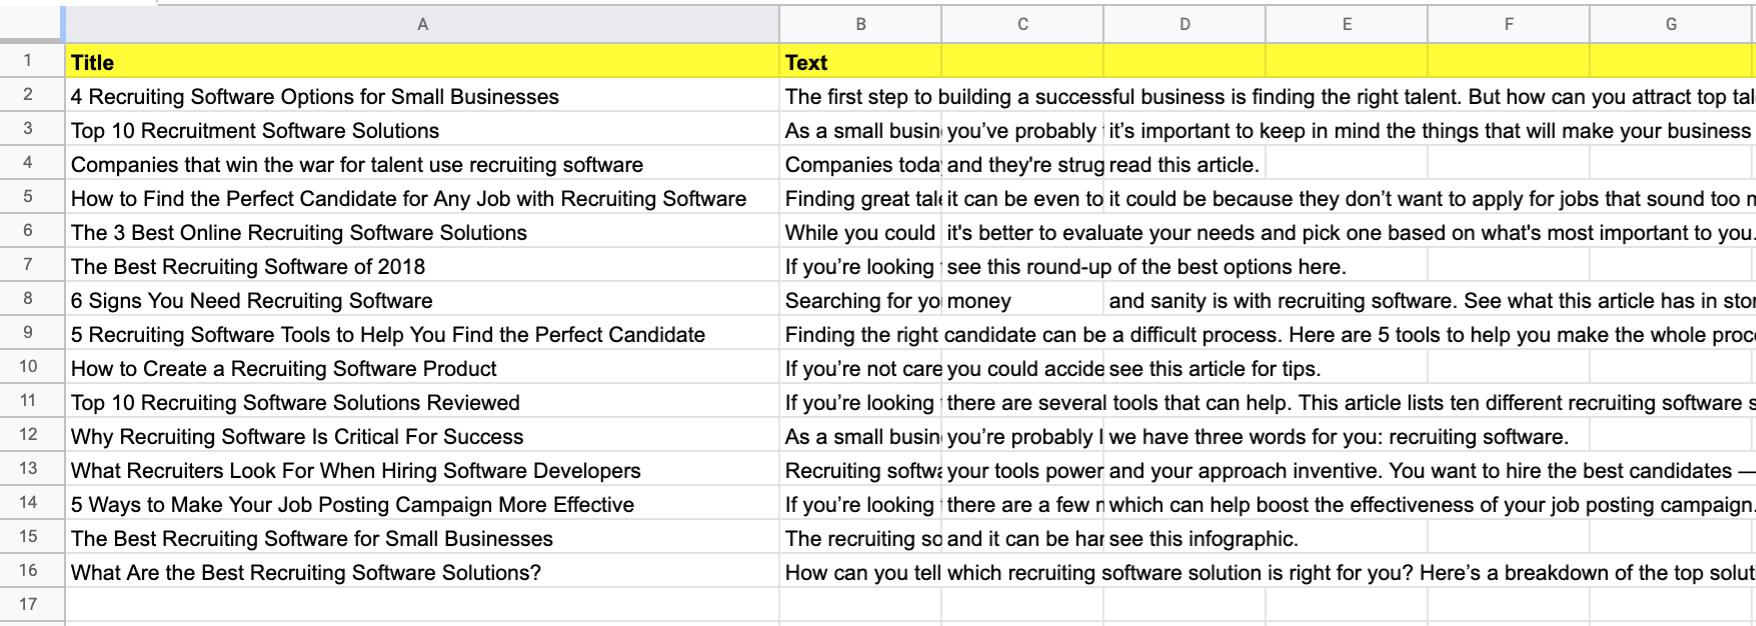 Excel spreadsheet of blog topic ideas exported from the blog ideas tool in SearchAtlas